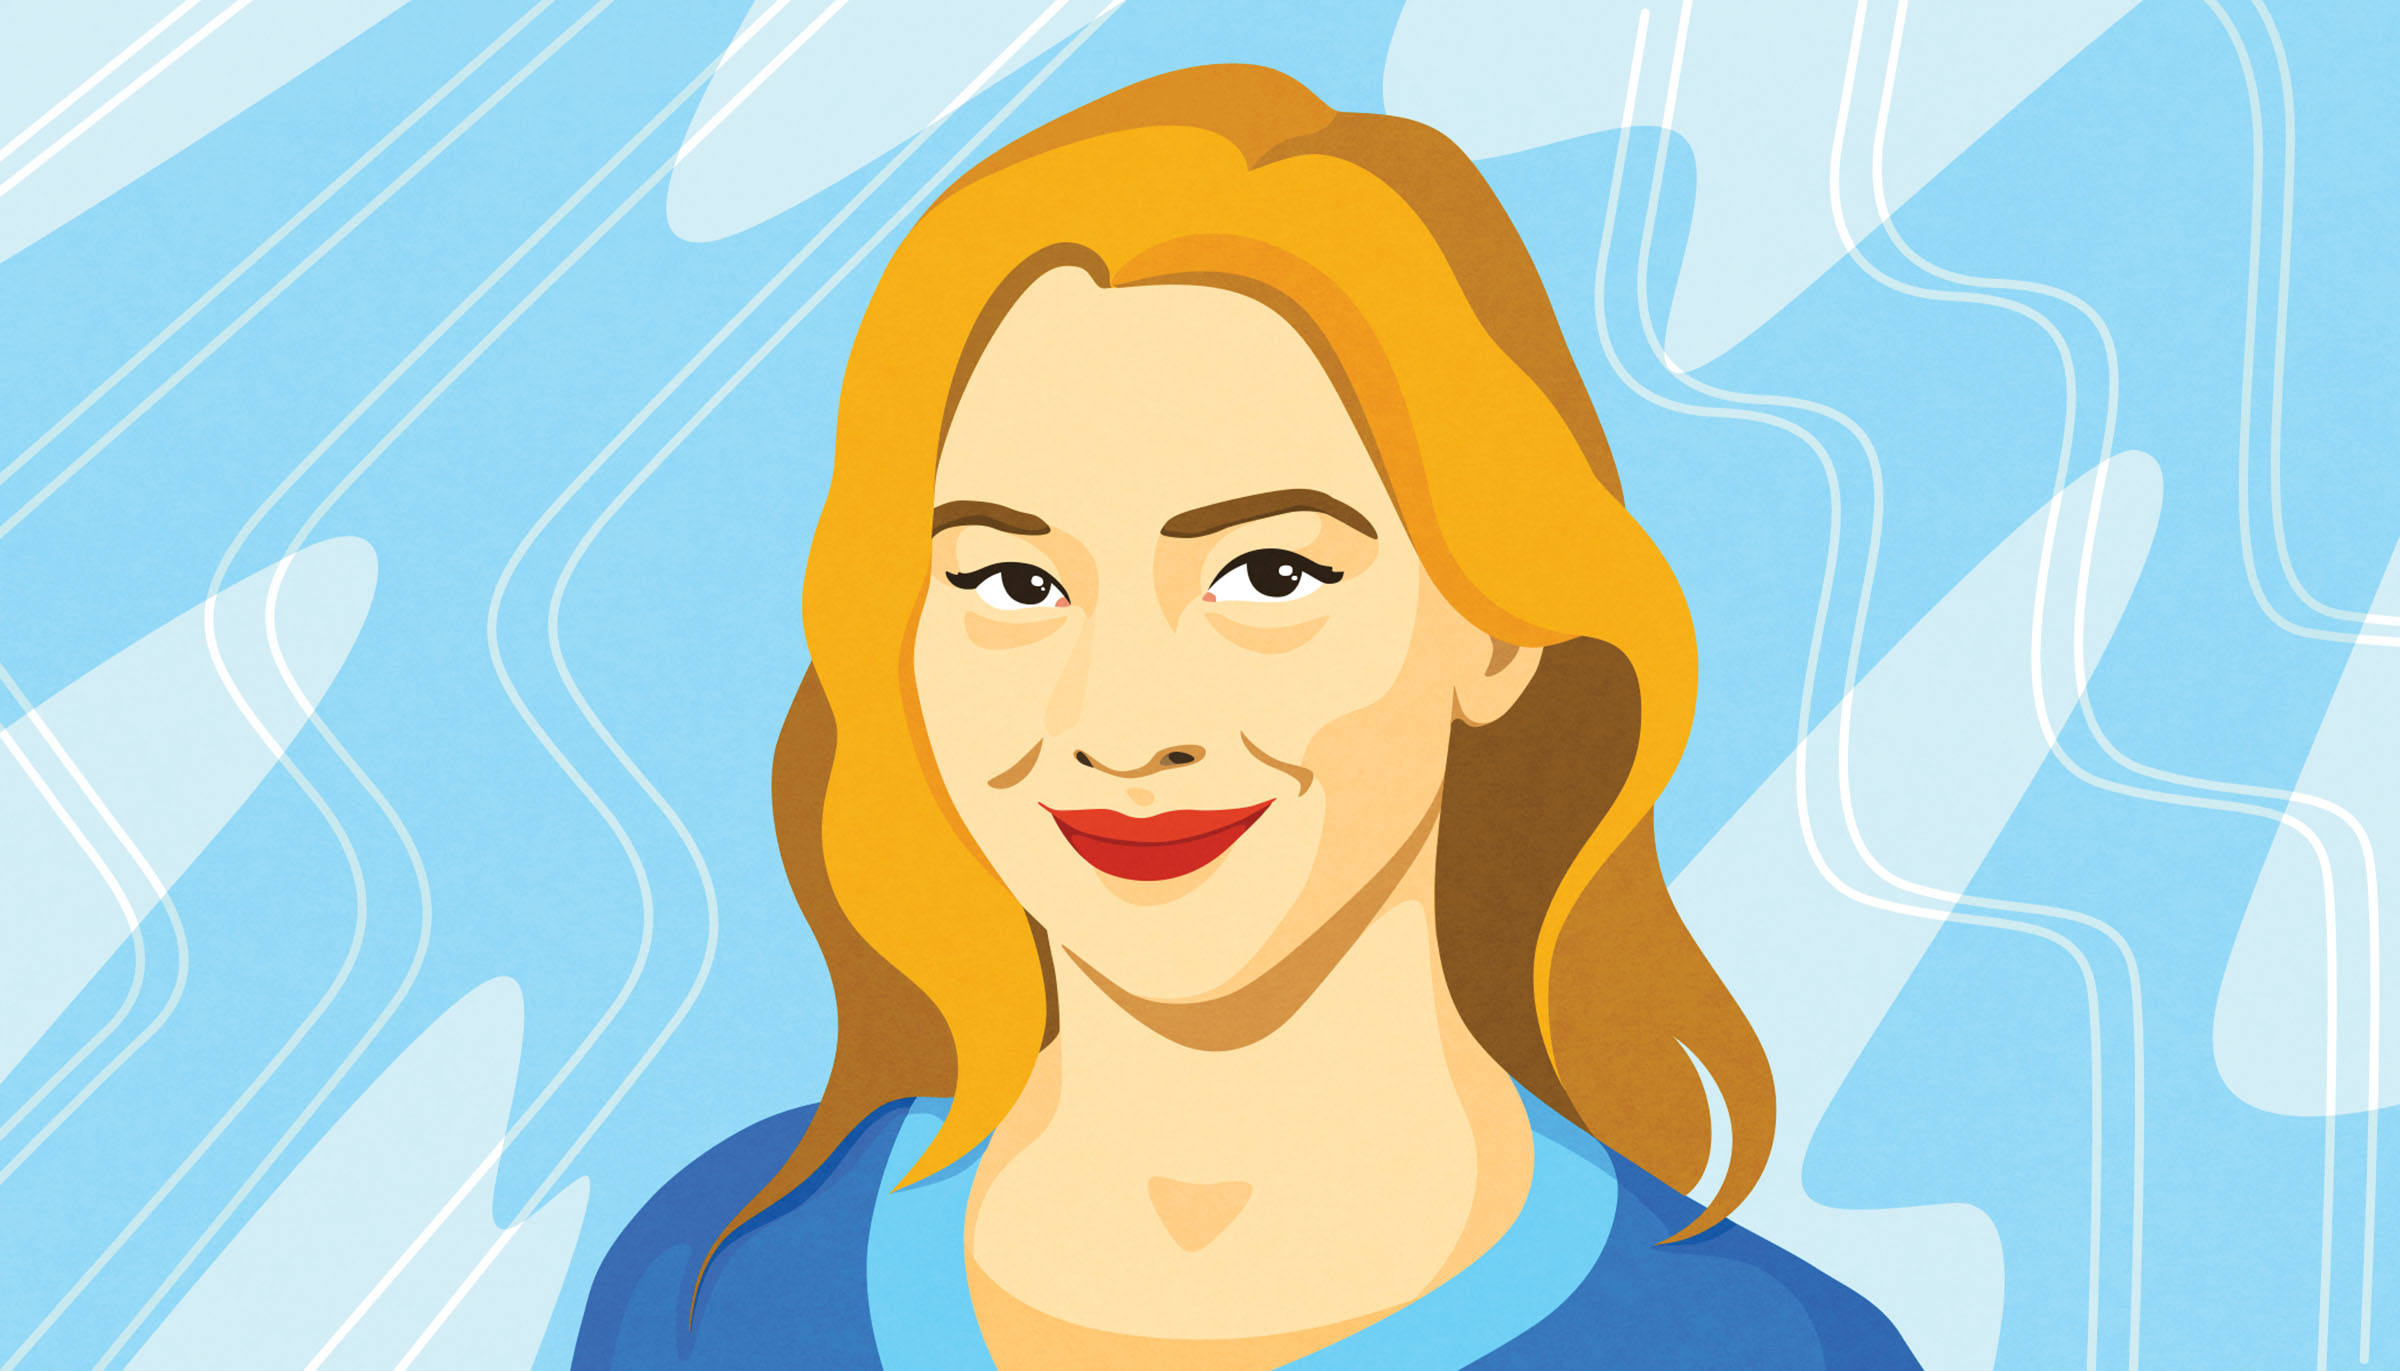 An illustration of a golden-haired woman with red lipstick on a blue background